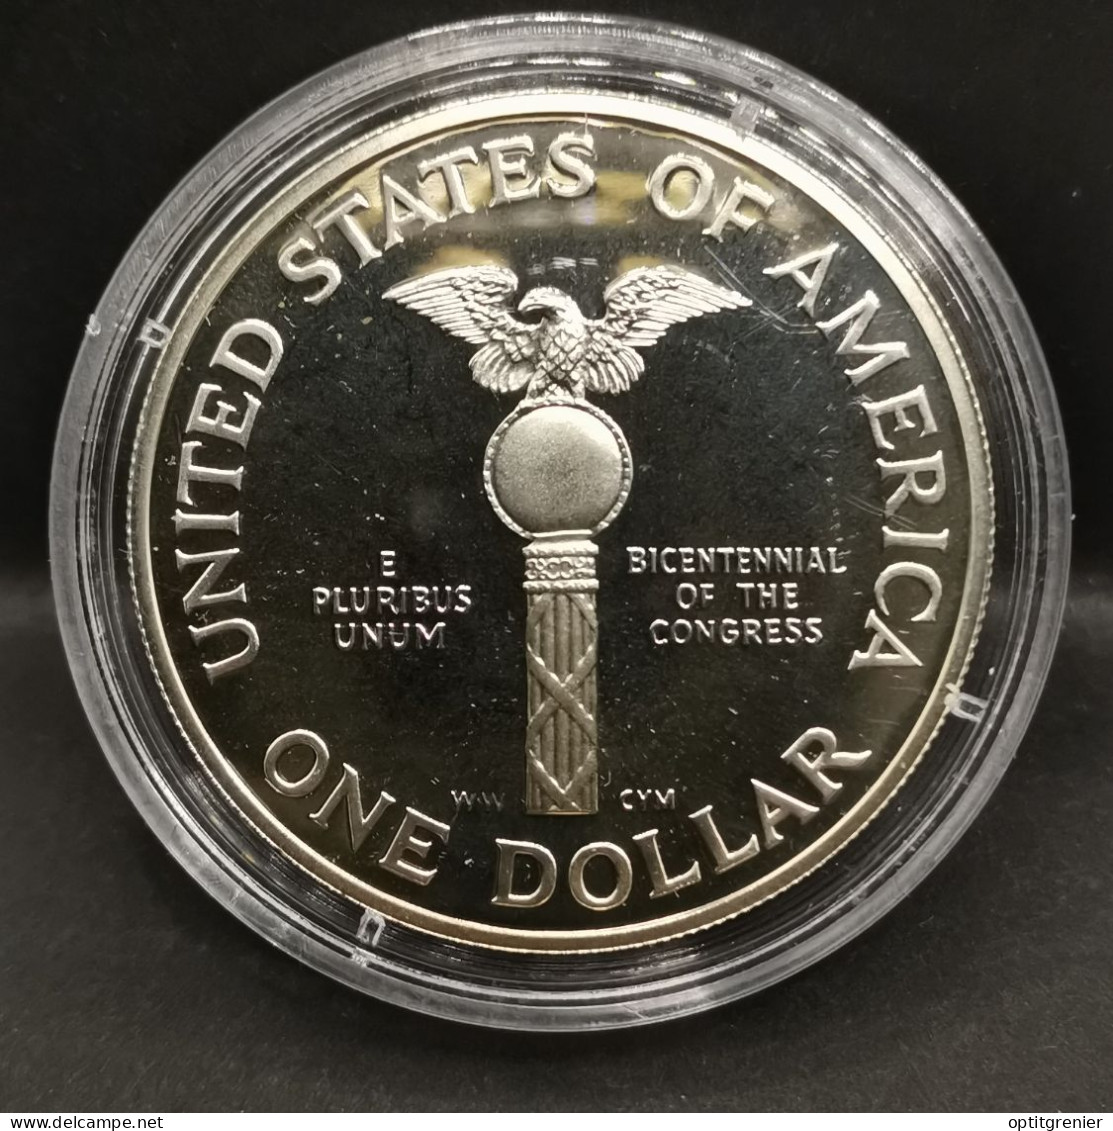 1 DOLLAR ARGENT BE 1989 S CONGRES USA / SILVER PROOF - Unclassified